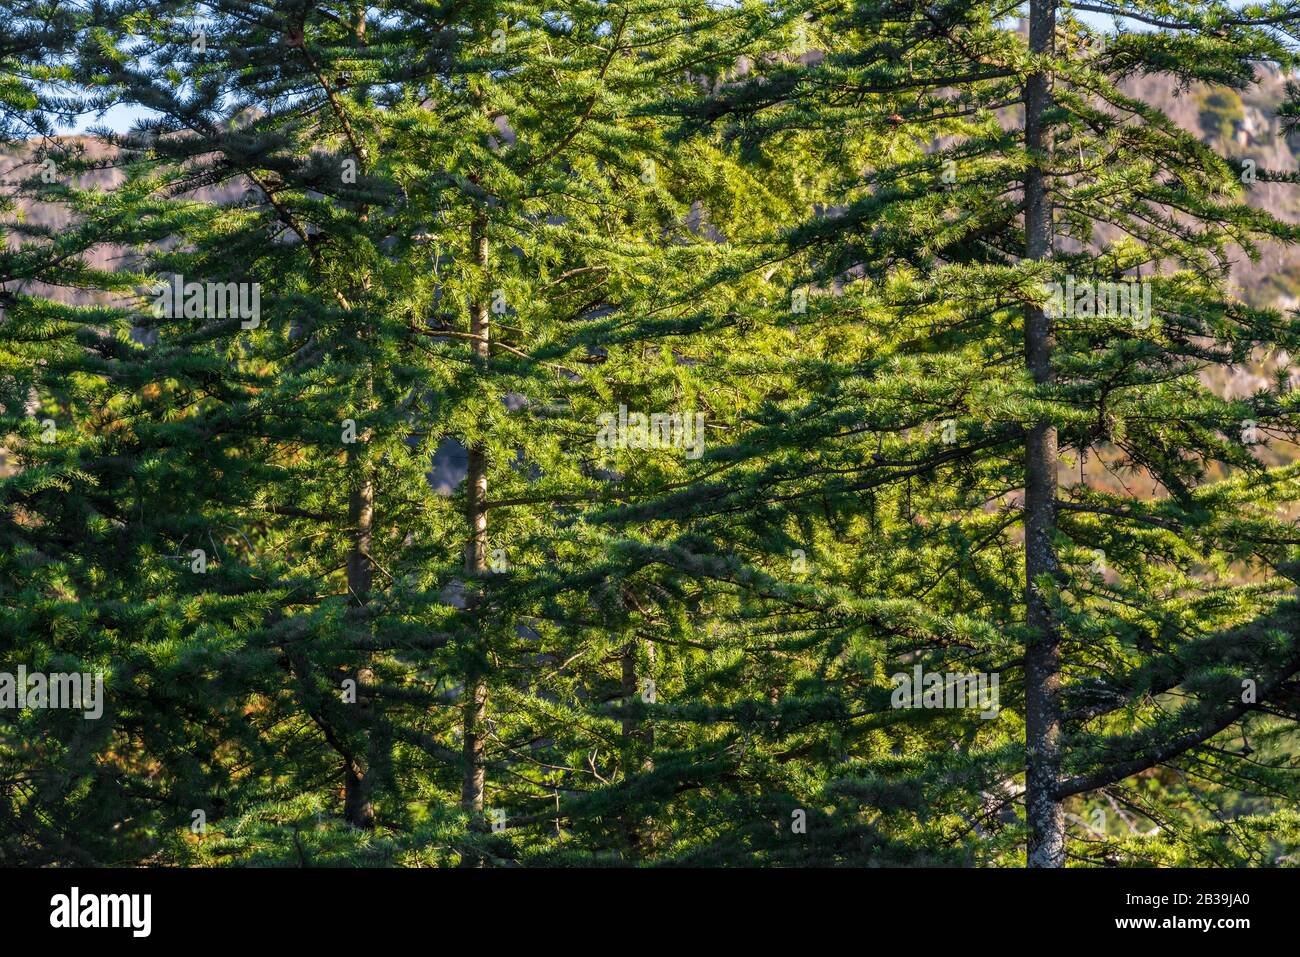 Close up to evergreen trees and their branches full o leaves Stock Photo